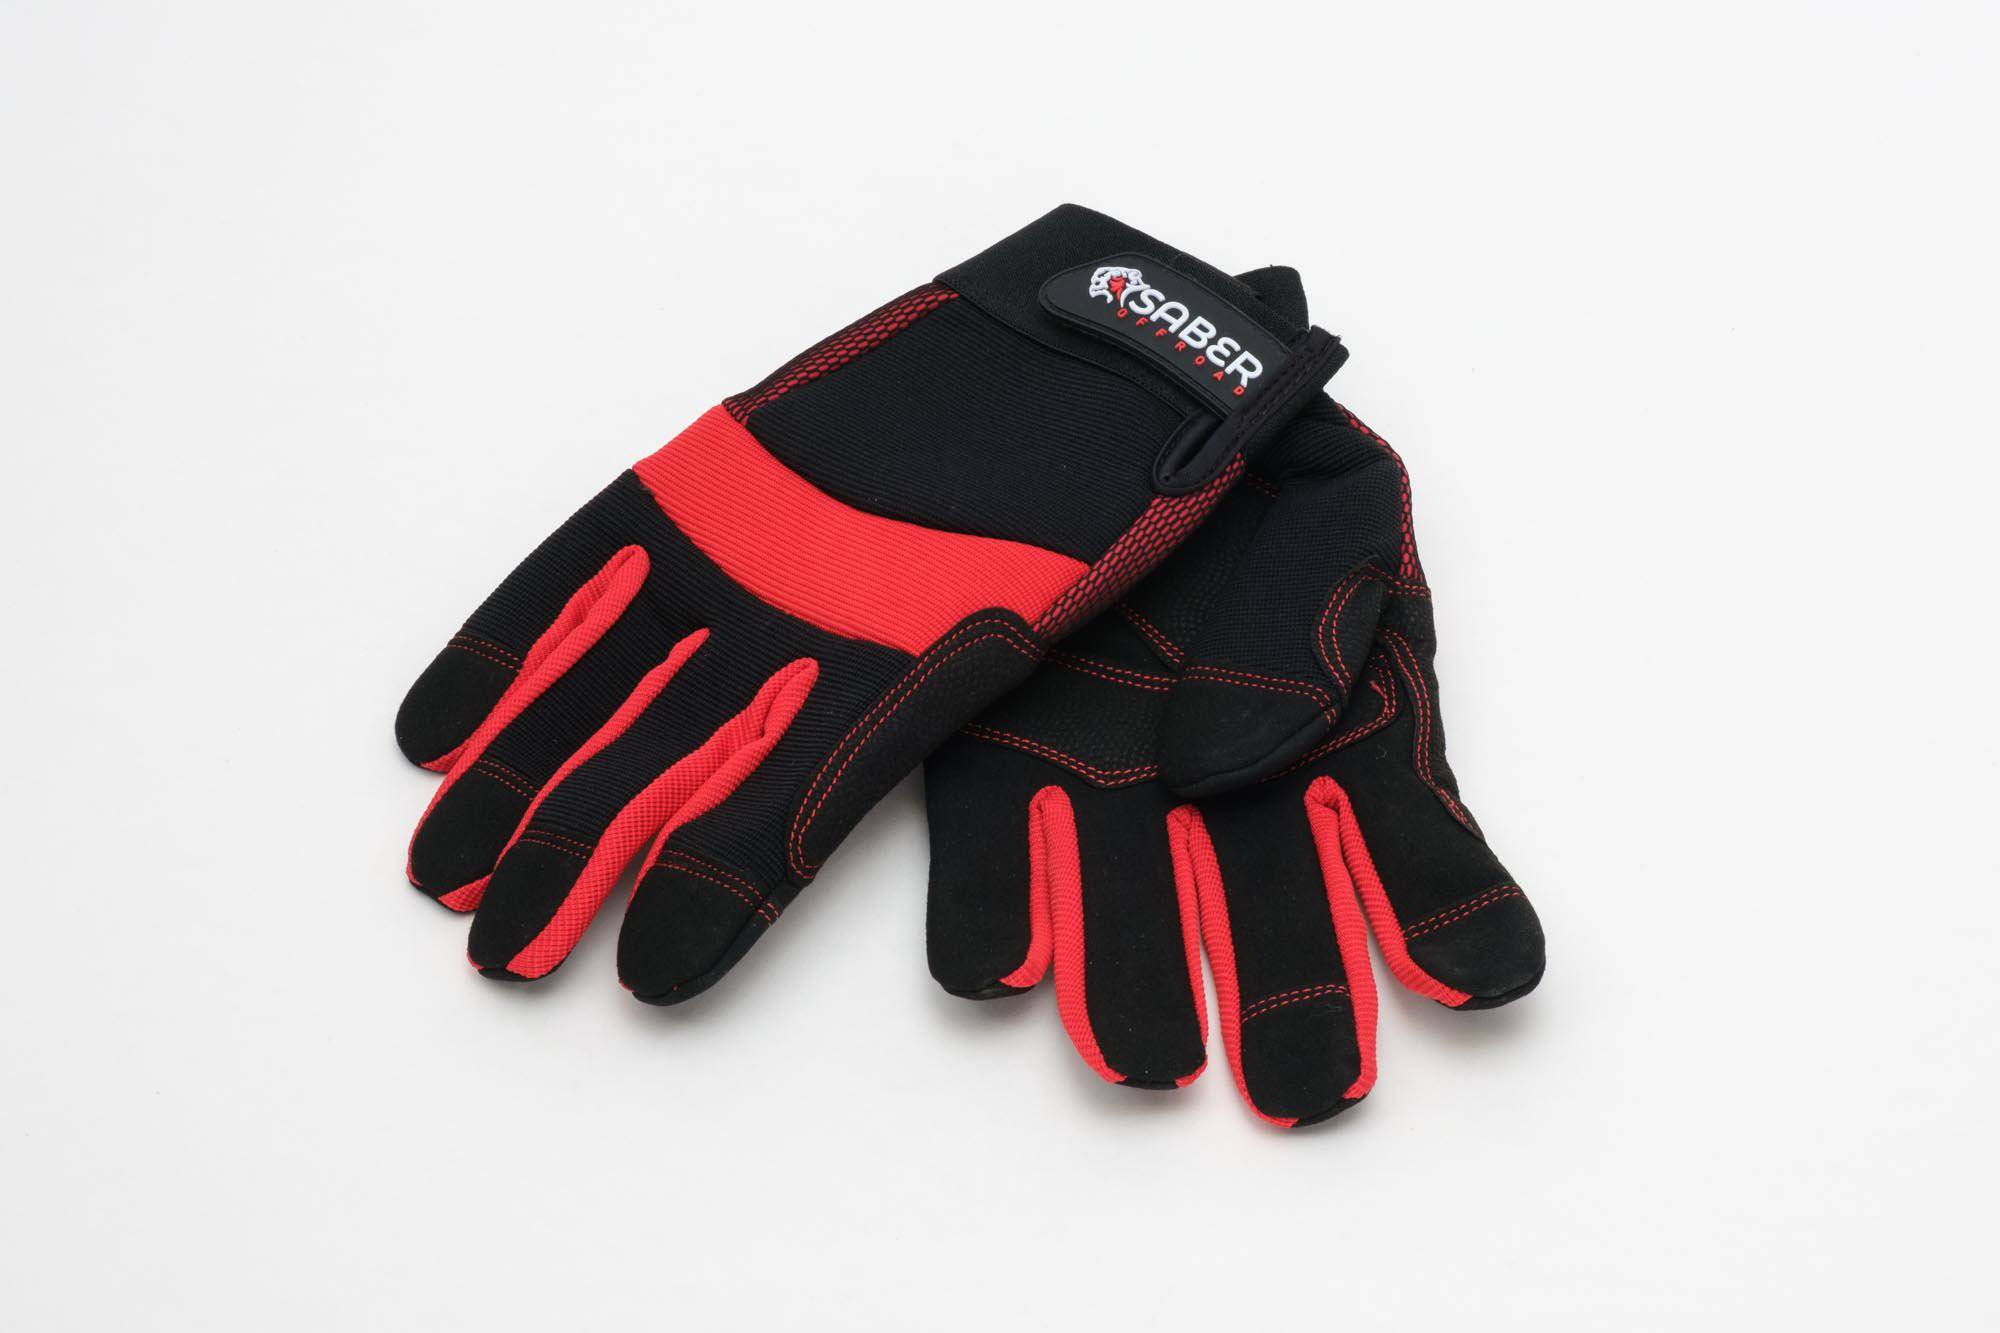 Saber Offroad Recovery Gloves – L/XL | Saber Offroad